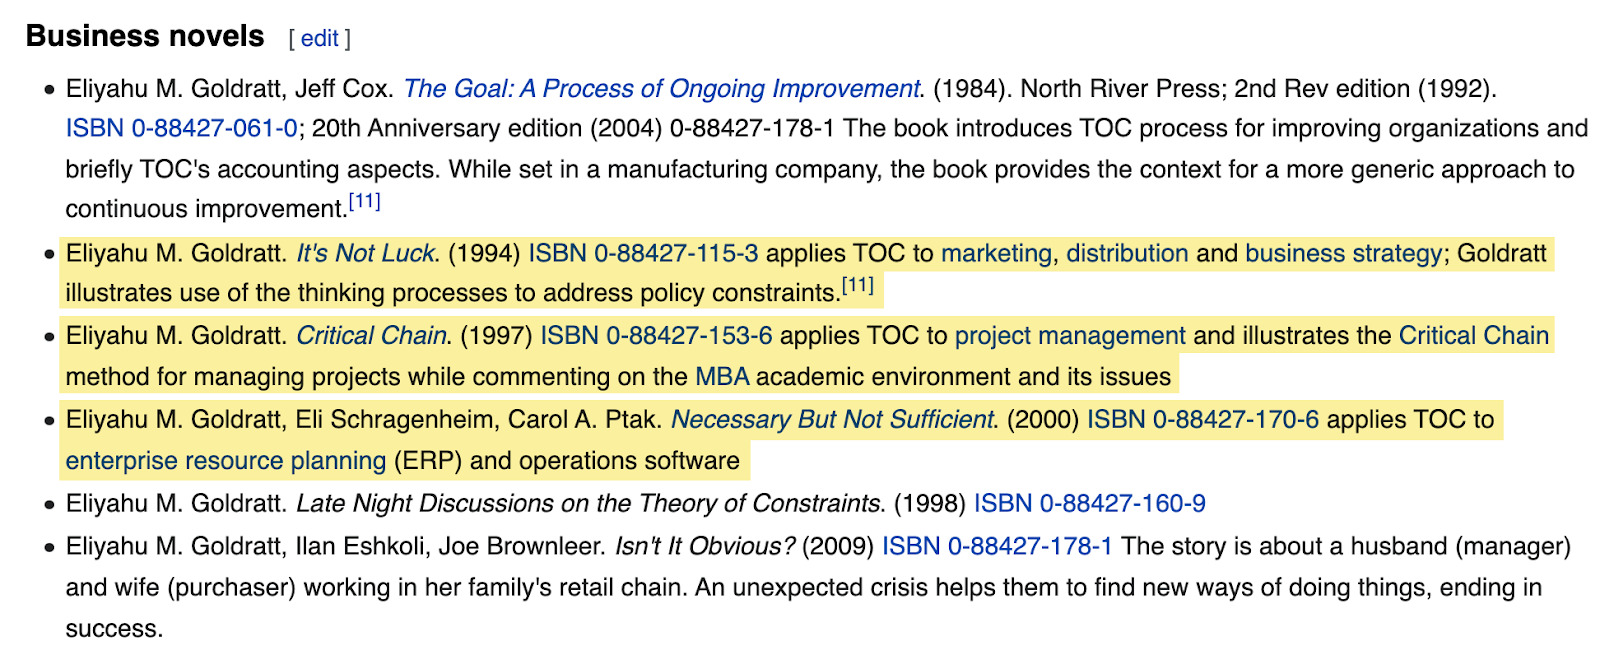 List of business novels on a Wiki page 